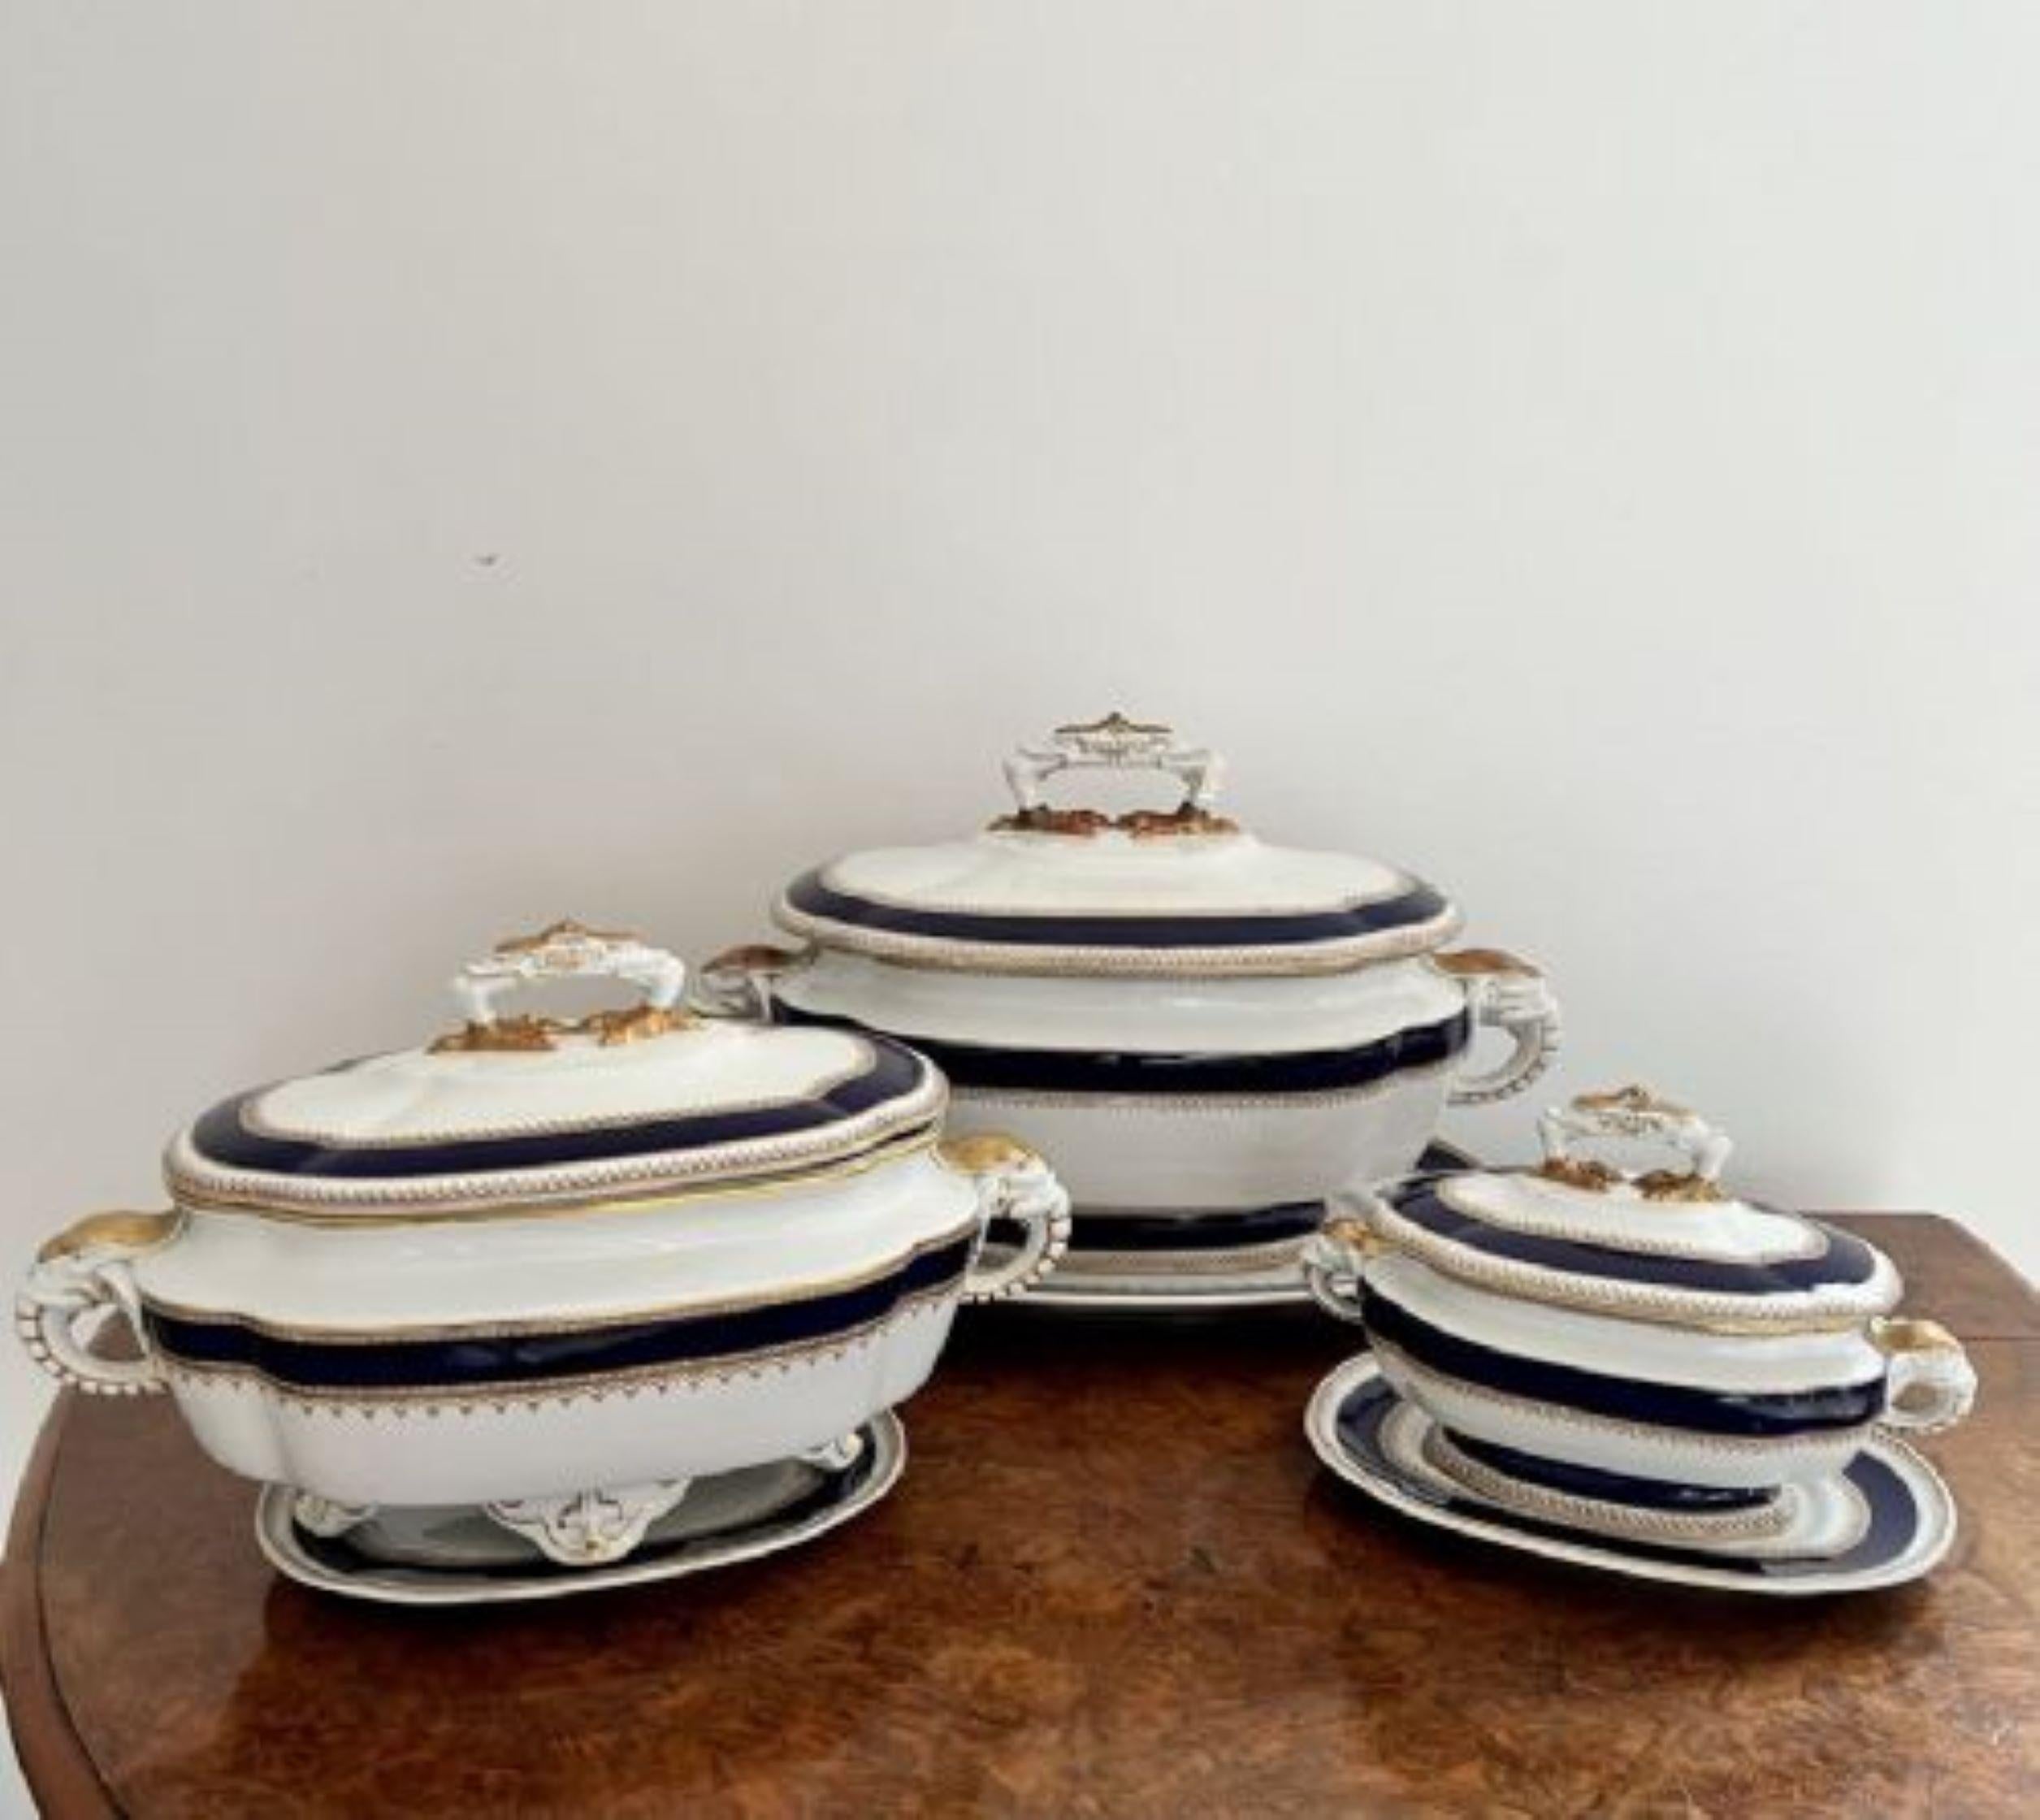 Charming set of three Antique Royal Worcester tureens having three antique Royal Worcester tureens, decorated with gold floral transfer patterns bordered by dark blue on a cream ground having elephant head handles to the sides and gold chickens feet